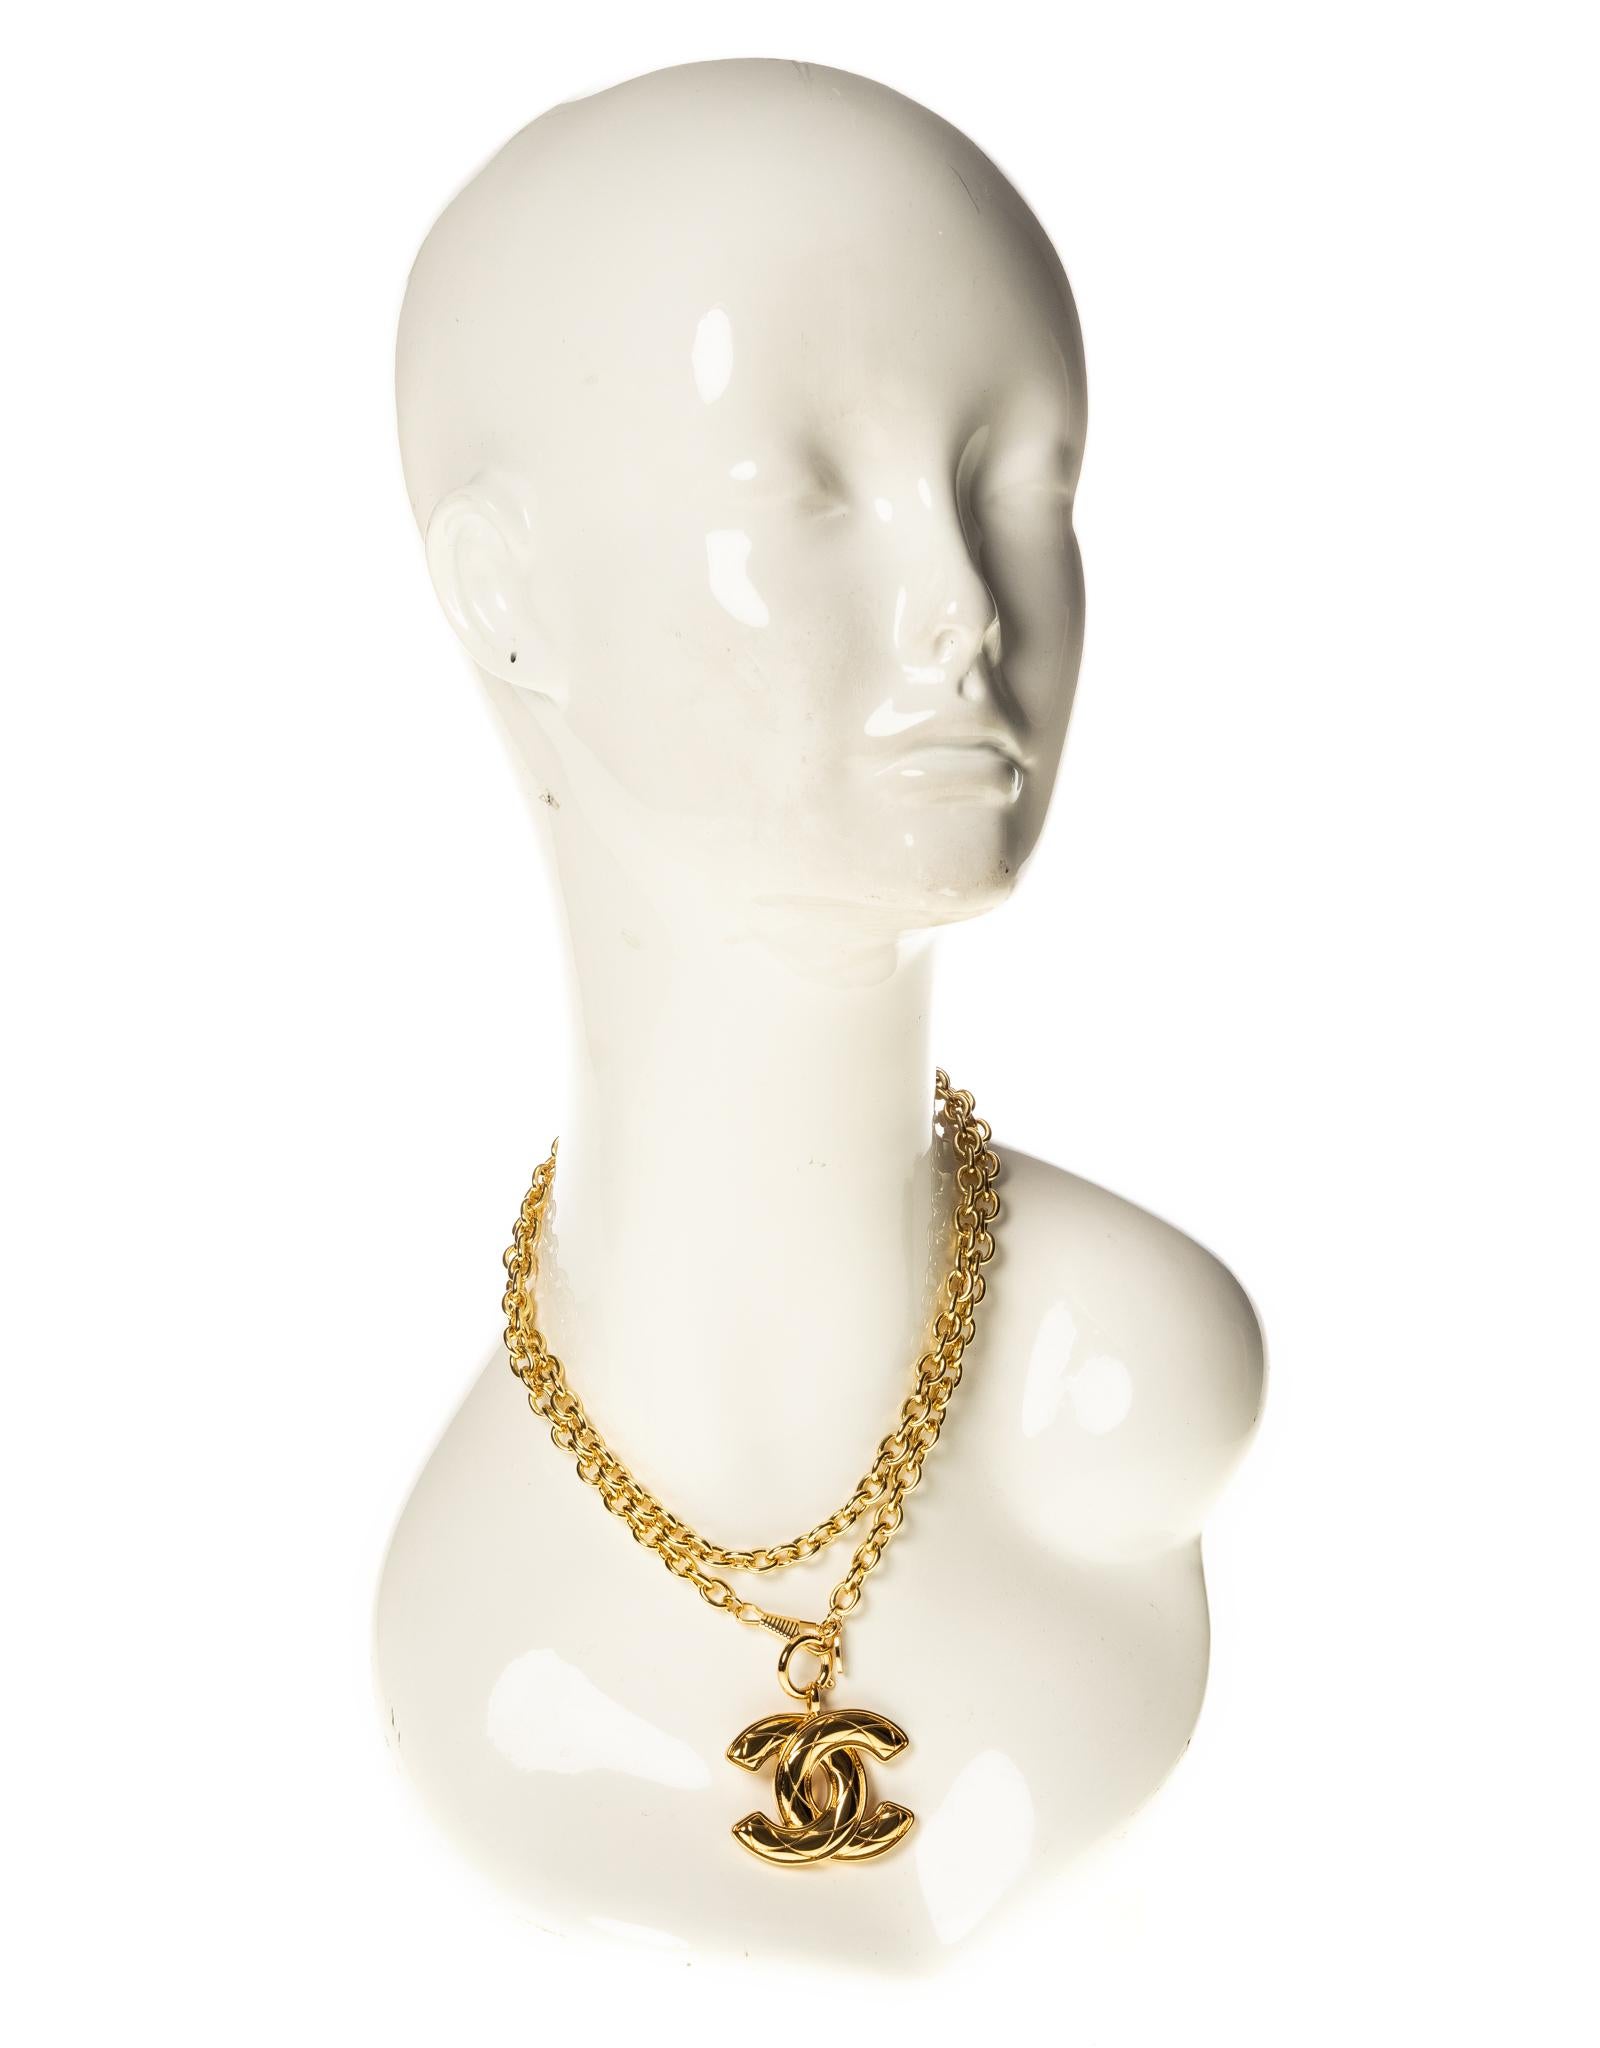 Chanel long chain necklace with CC logo quilted pendant. Very good condition, comes with Chanel box. Only pendant is authentic, necklace added by jeweller. 

COLOR: Gold
MATERIAL: Metal 
MEASURES: Charm diameter 1.5”, chain circumference roughly